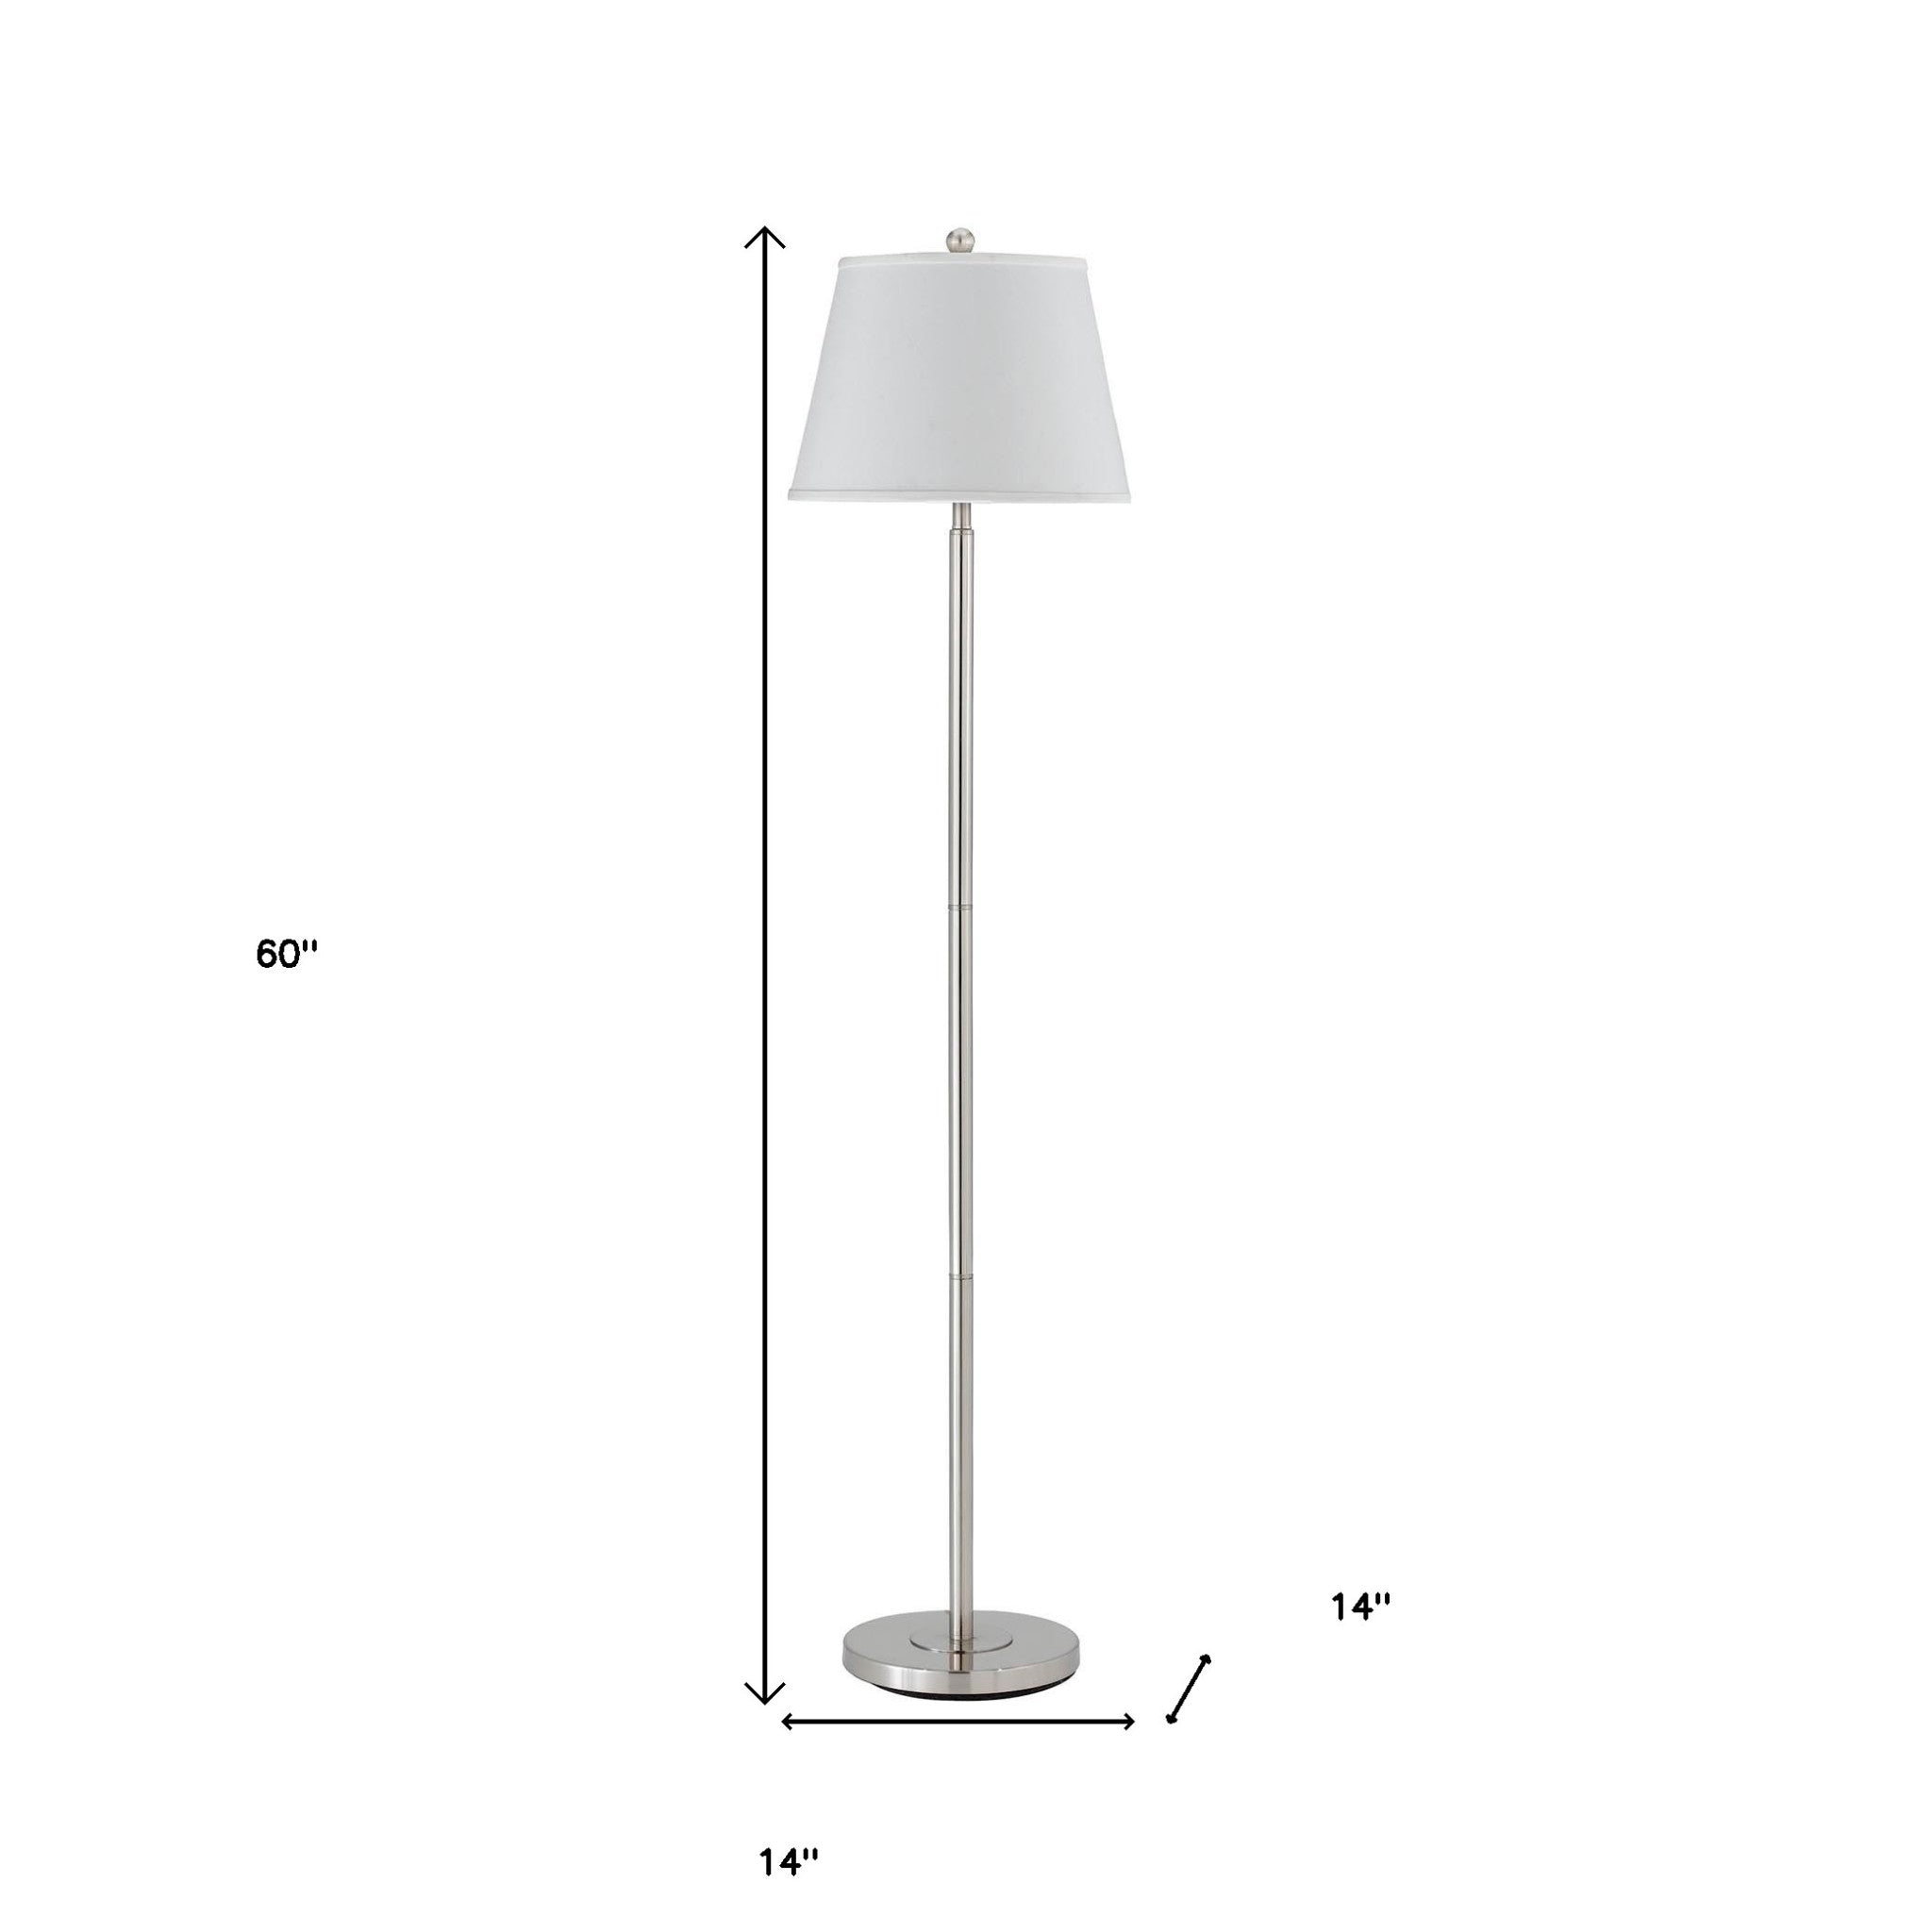 60" Nickel Traditional Shaped Floor Lamp With White Square Shade